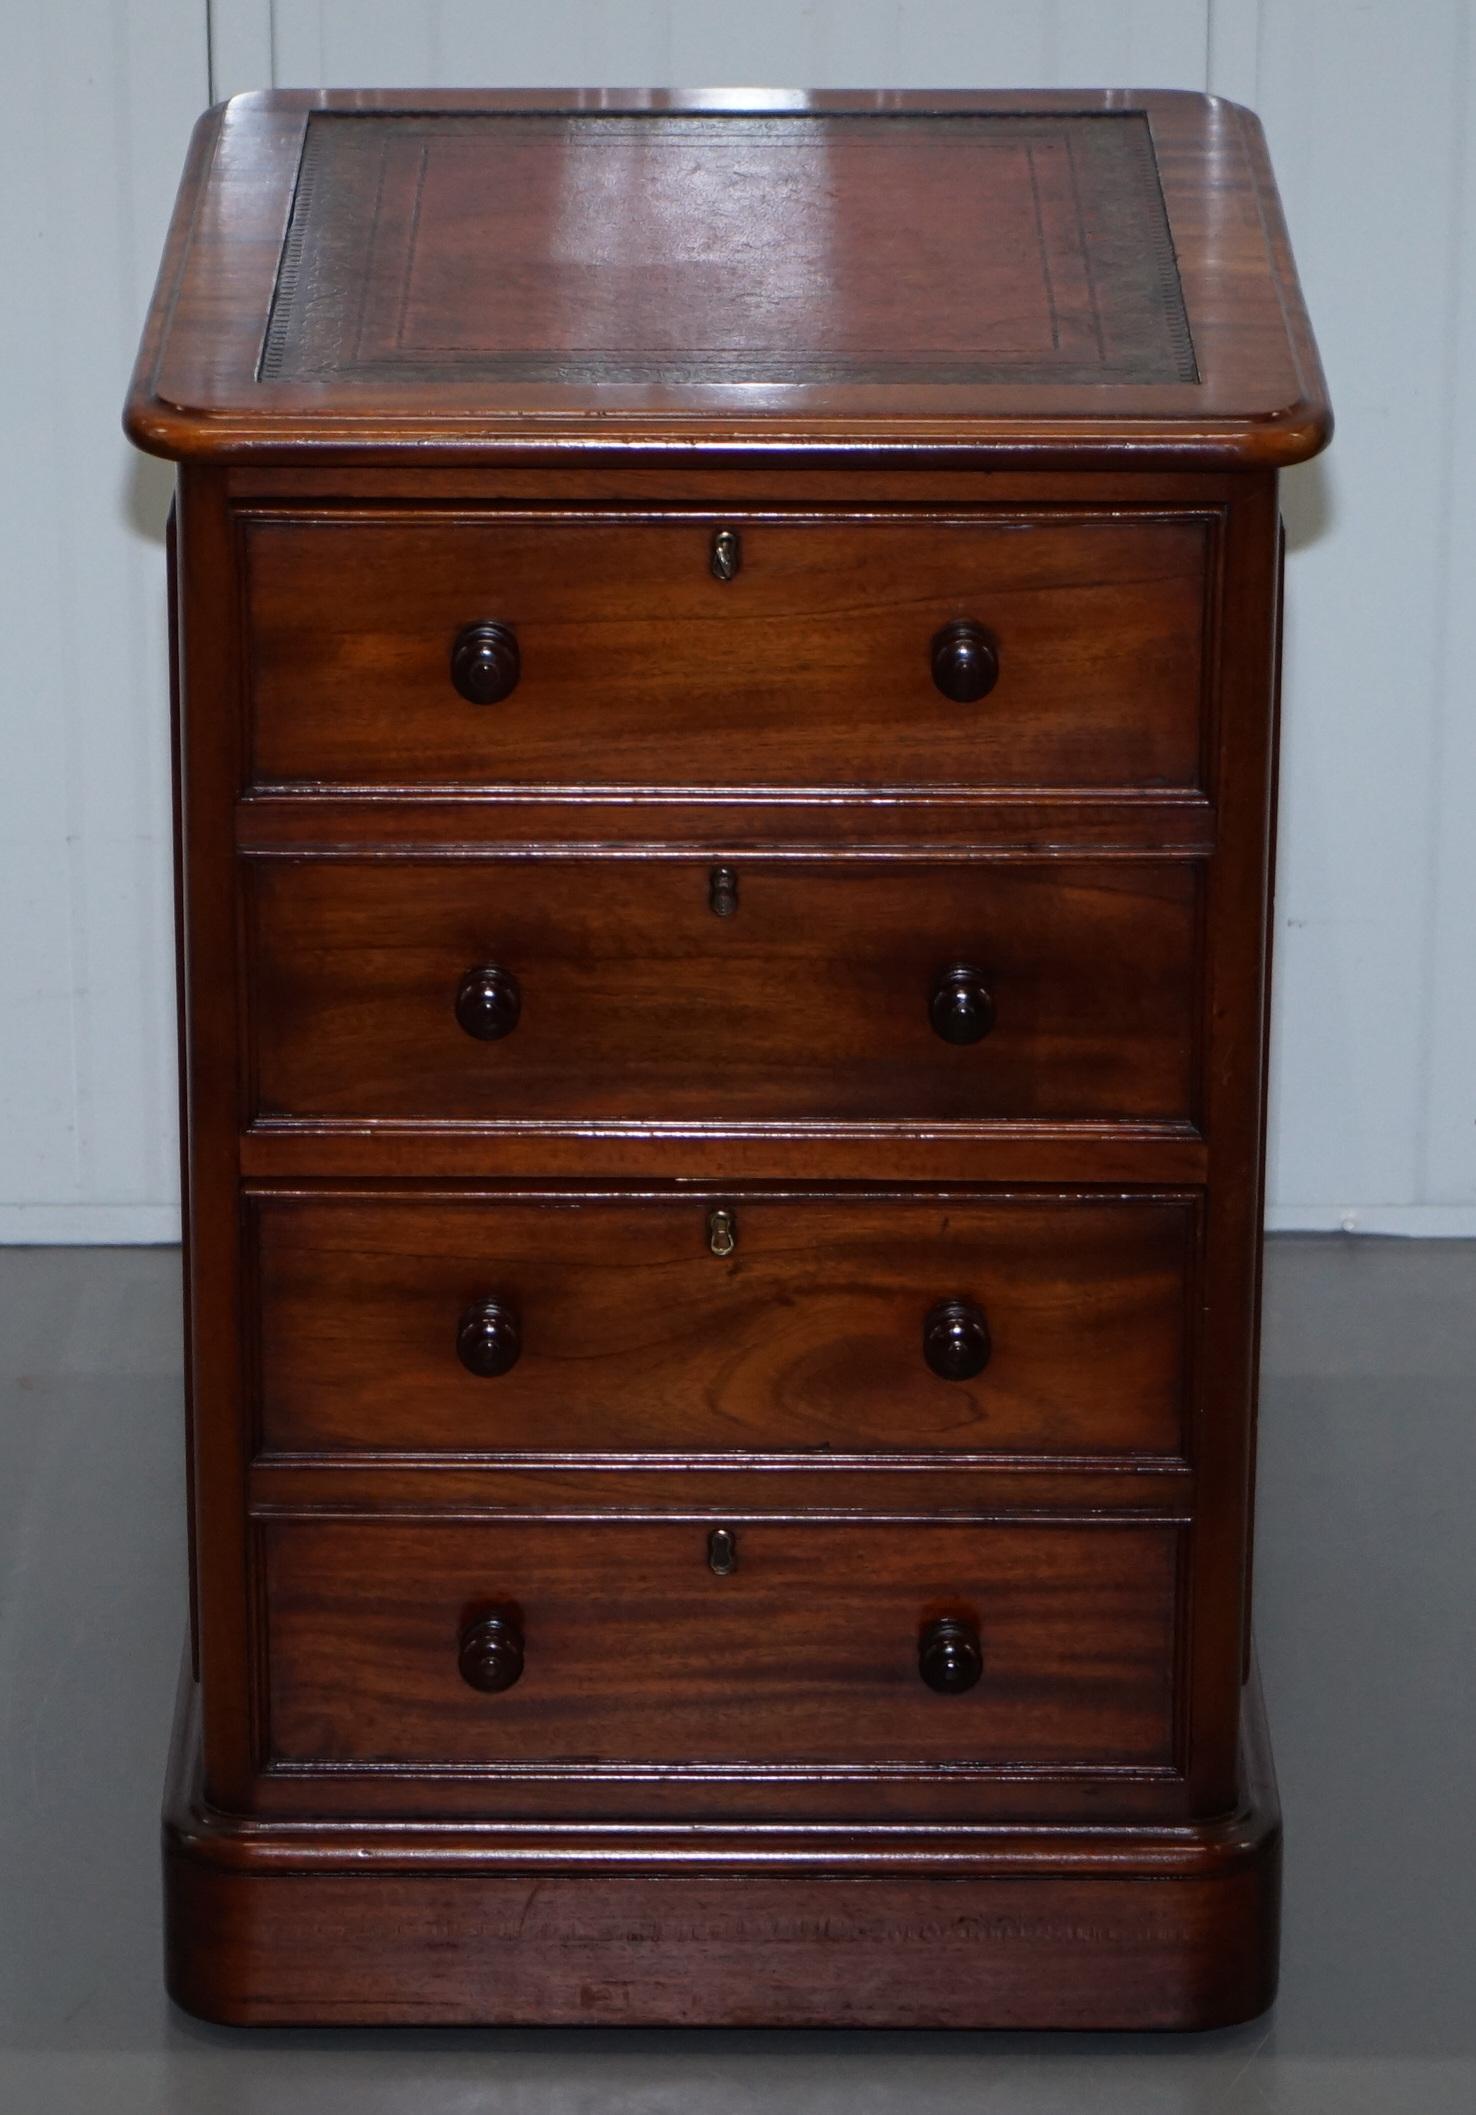 We are delighted to offer for save this lovely solid cherrywood office filing cabinet with oxblood leather top

This piece is part of a suite, the entire collection includes a twin pedestal partner desk, a pair of tall thin bookcases, a side